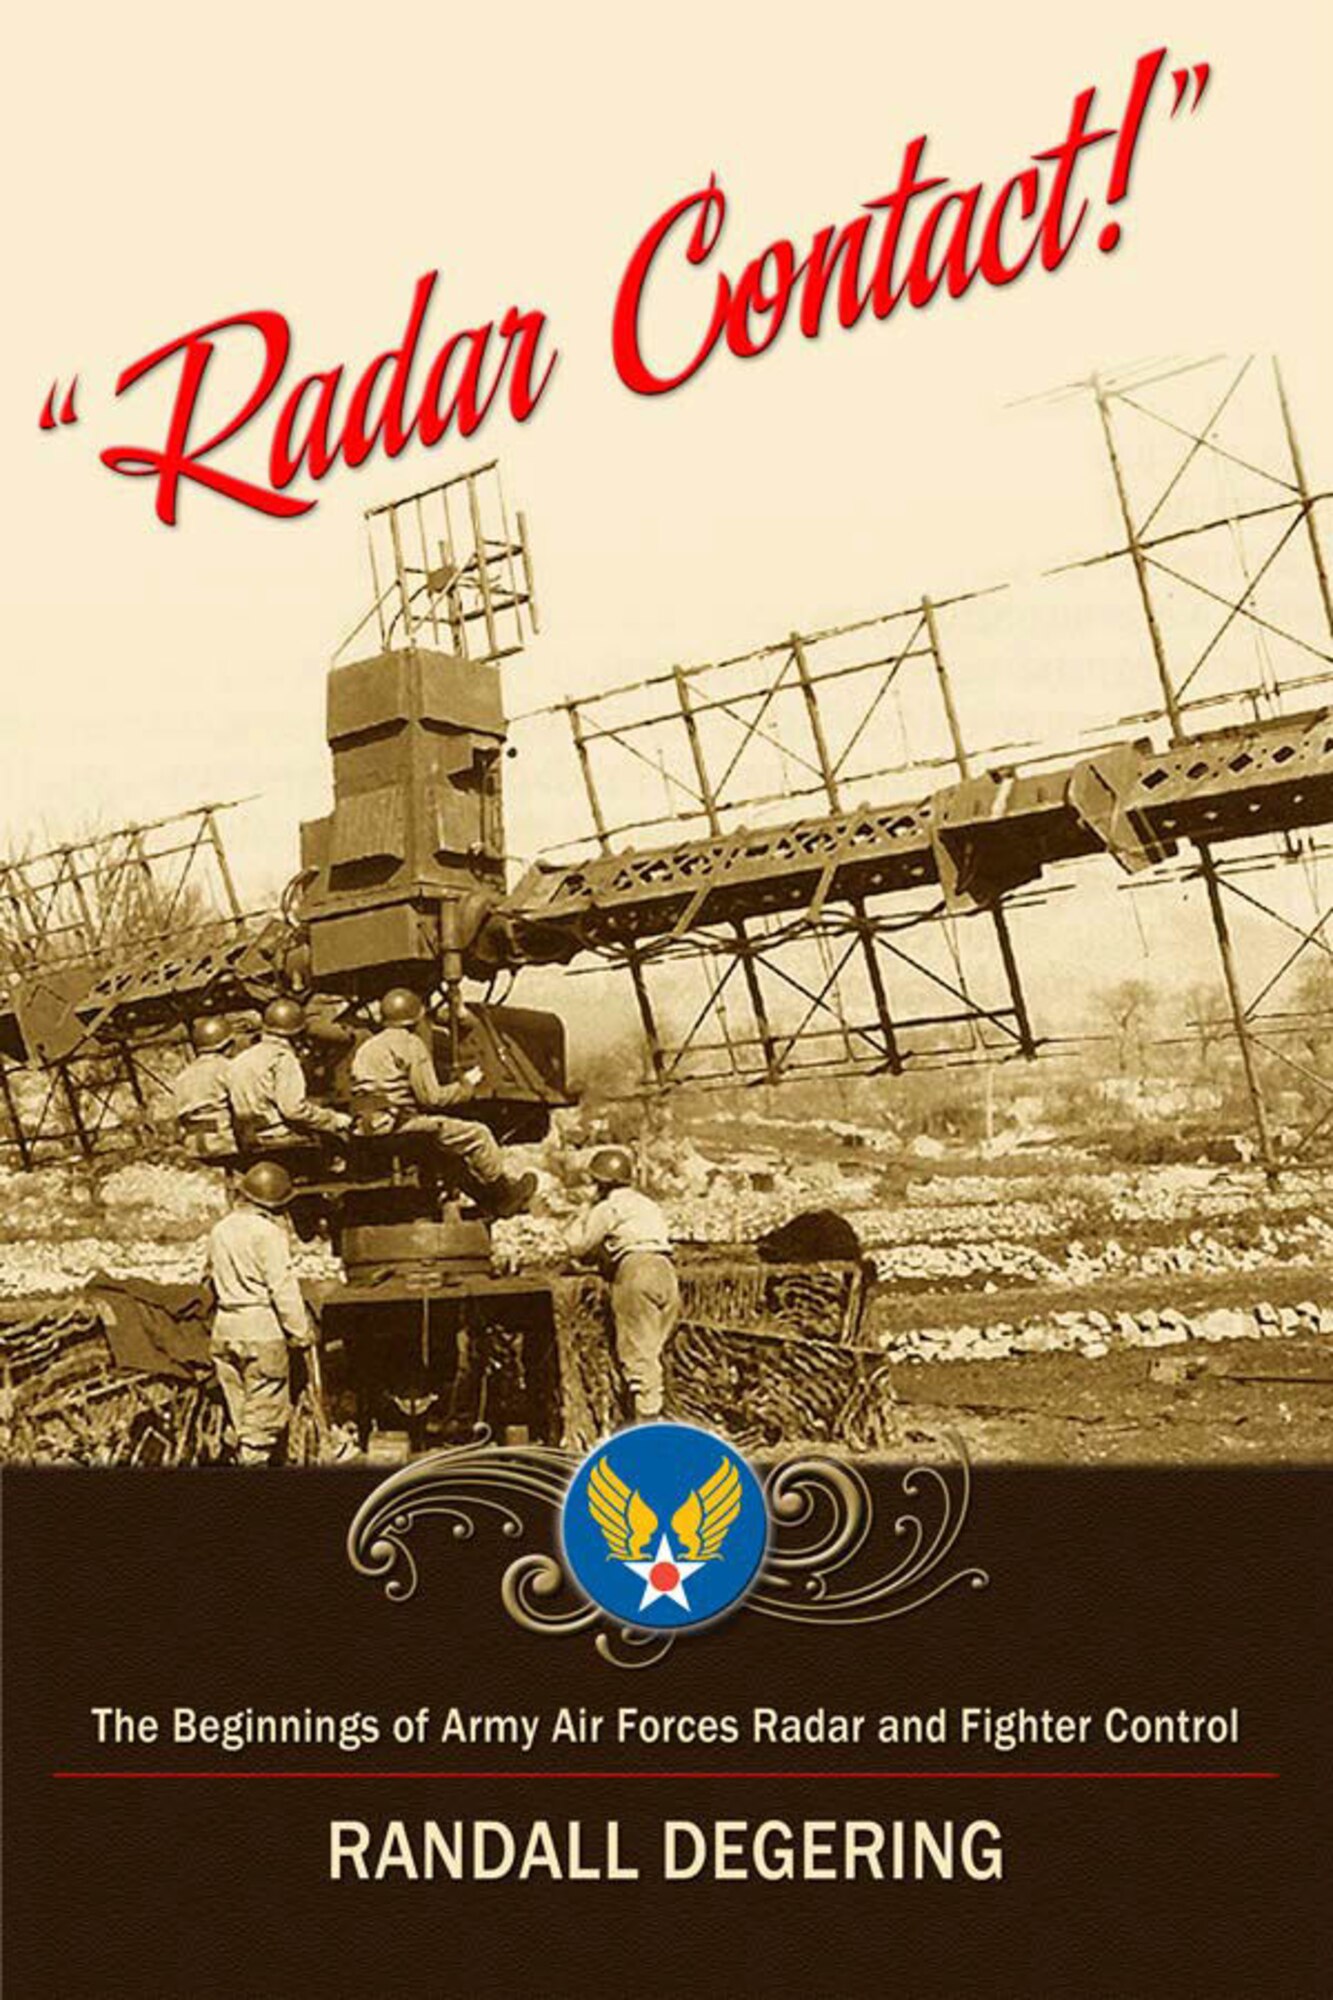 Air University Press new book release: Radar Contact by Randall DeGering